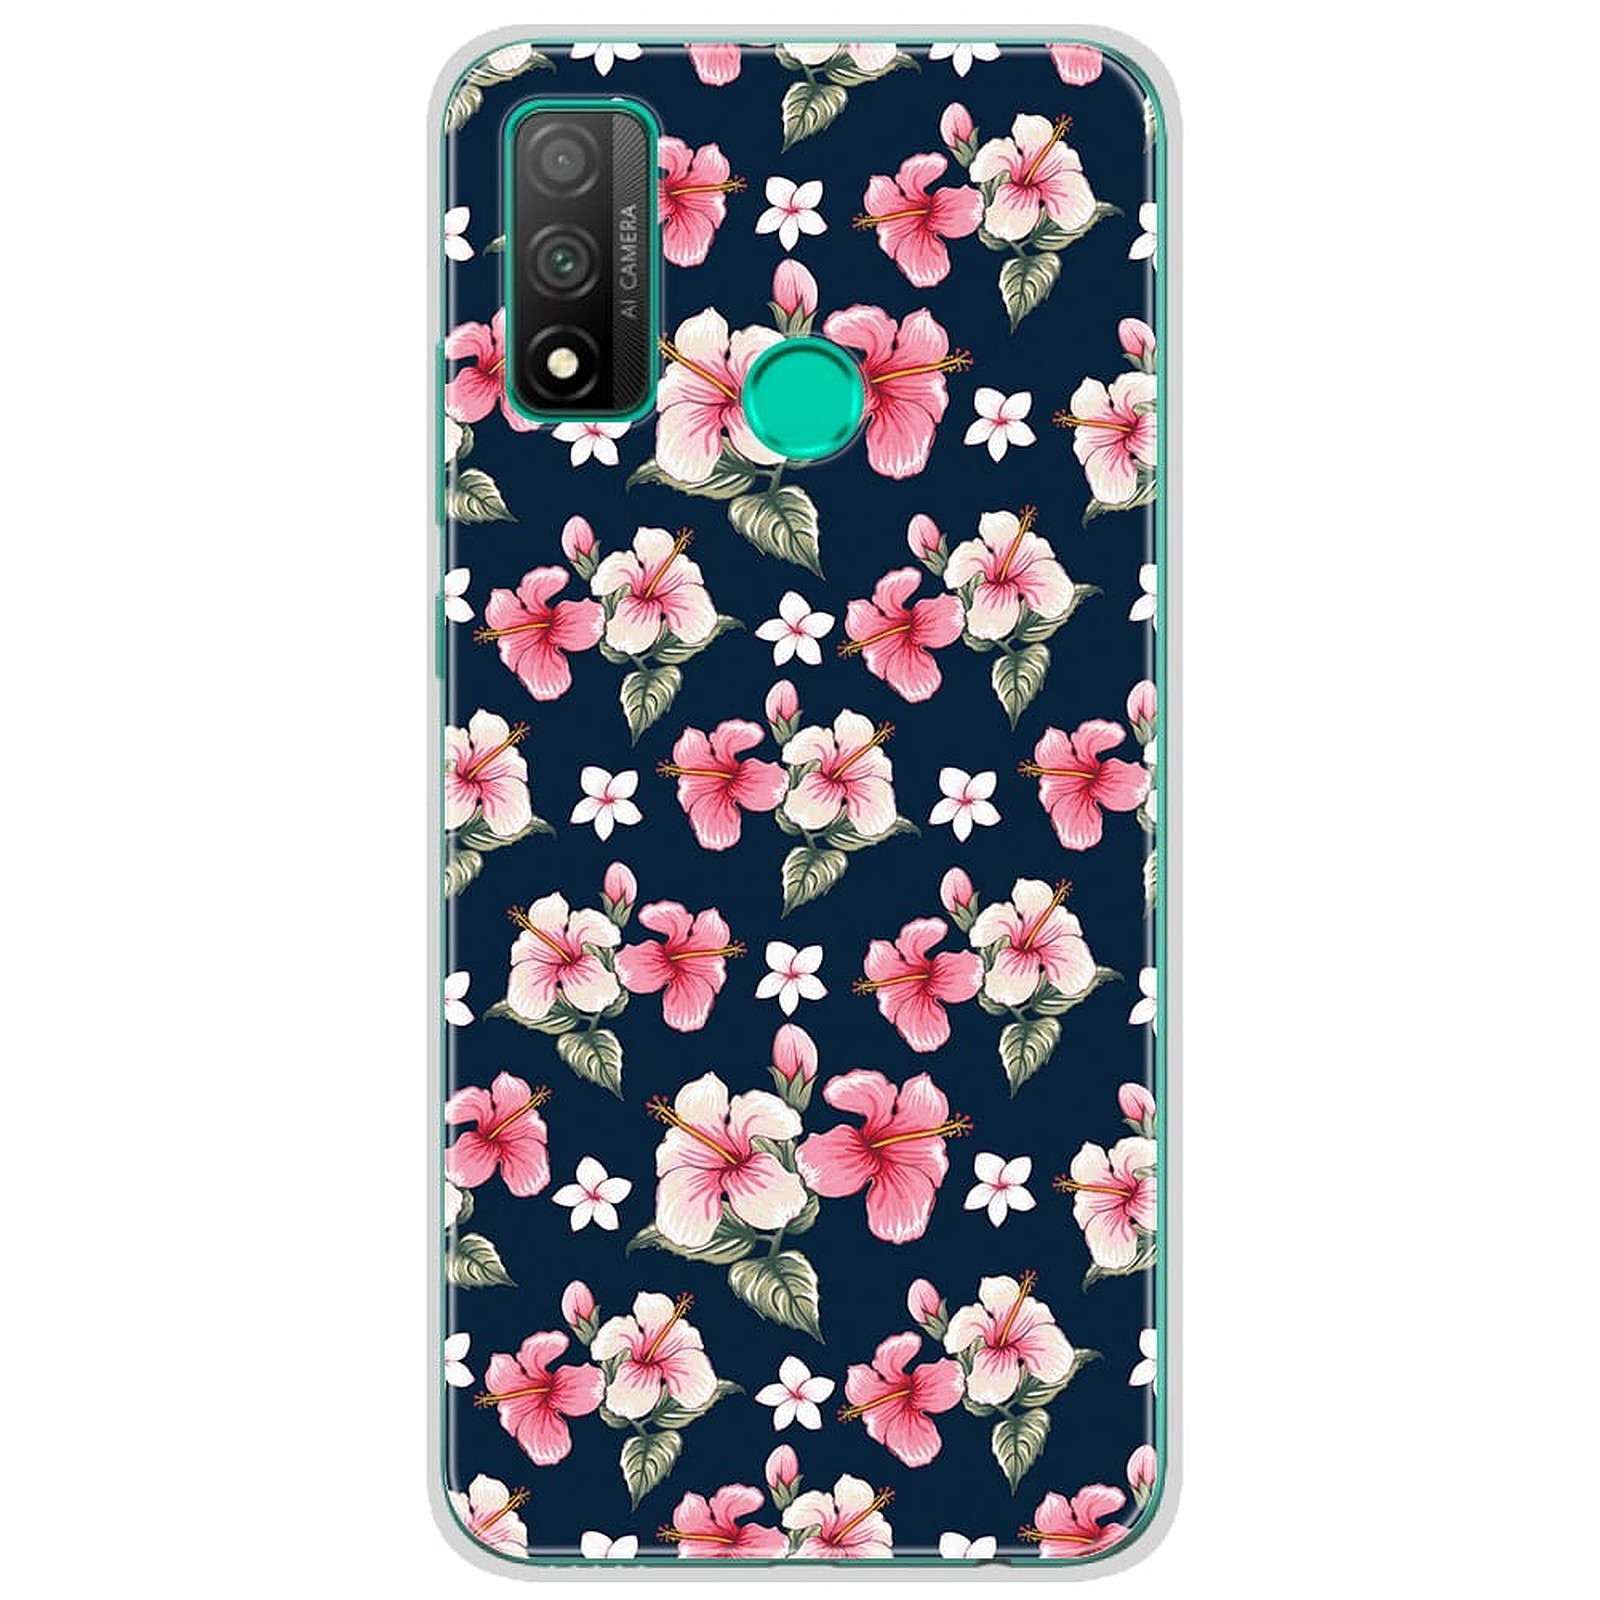 1001 Coques Coque silicone gel Huawei P Smart 2020 motif Hibiscus Vintage - Coque telephone 1001Coques